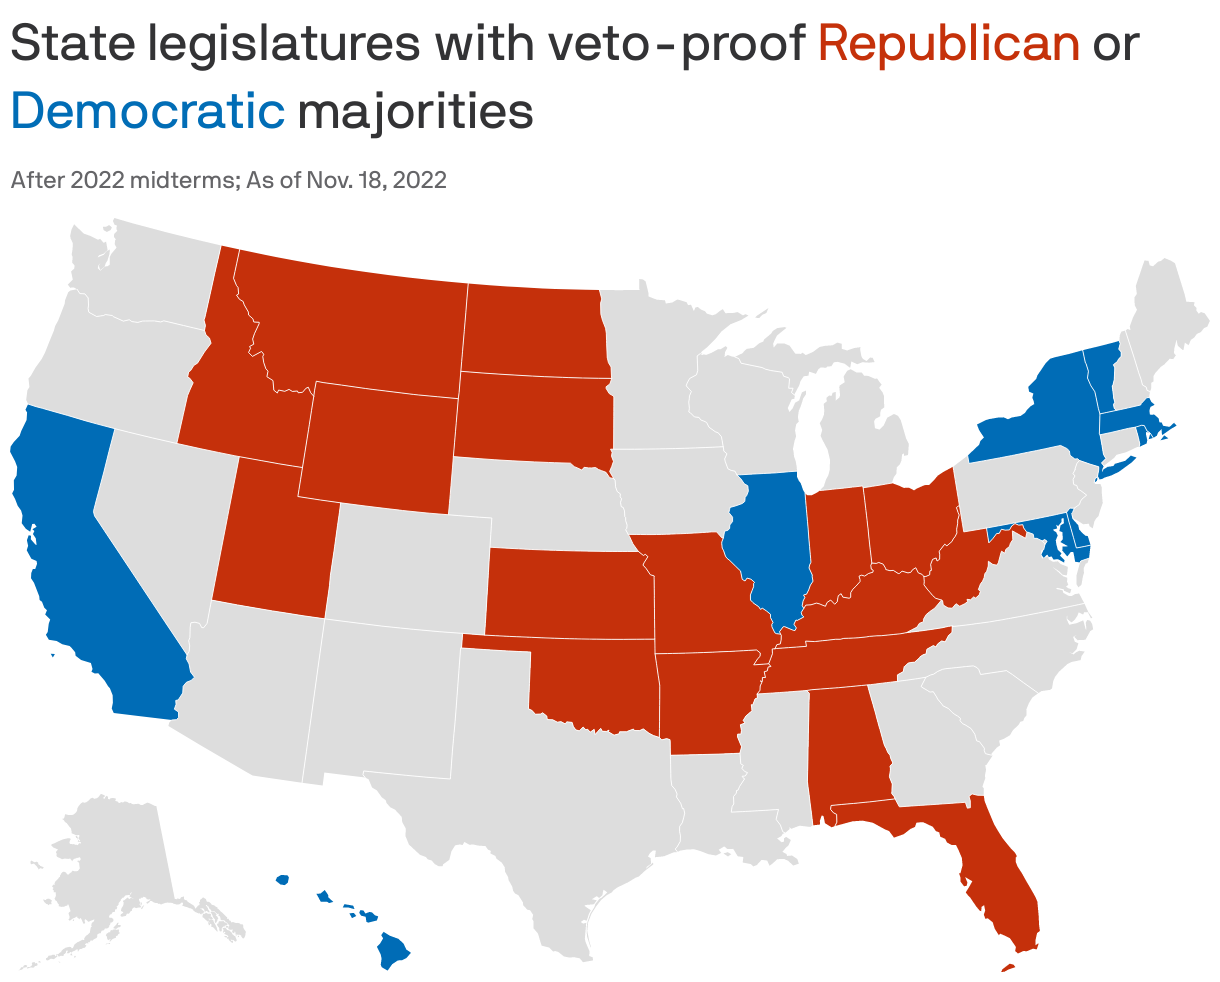 State legislatures with veto-proof <span style="color:#c5310a;">Republican</span> or <span style="color:#016db6;">Democratic</span> majorities 

